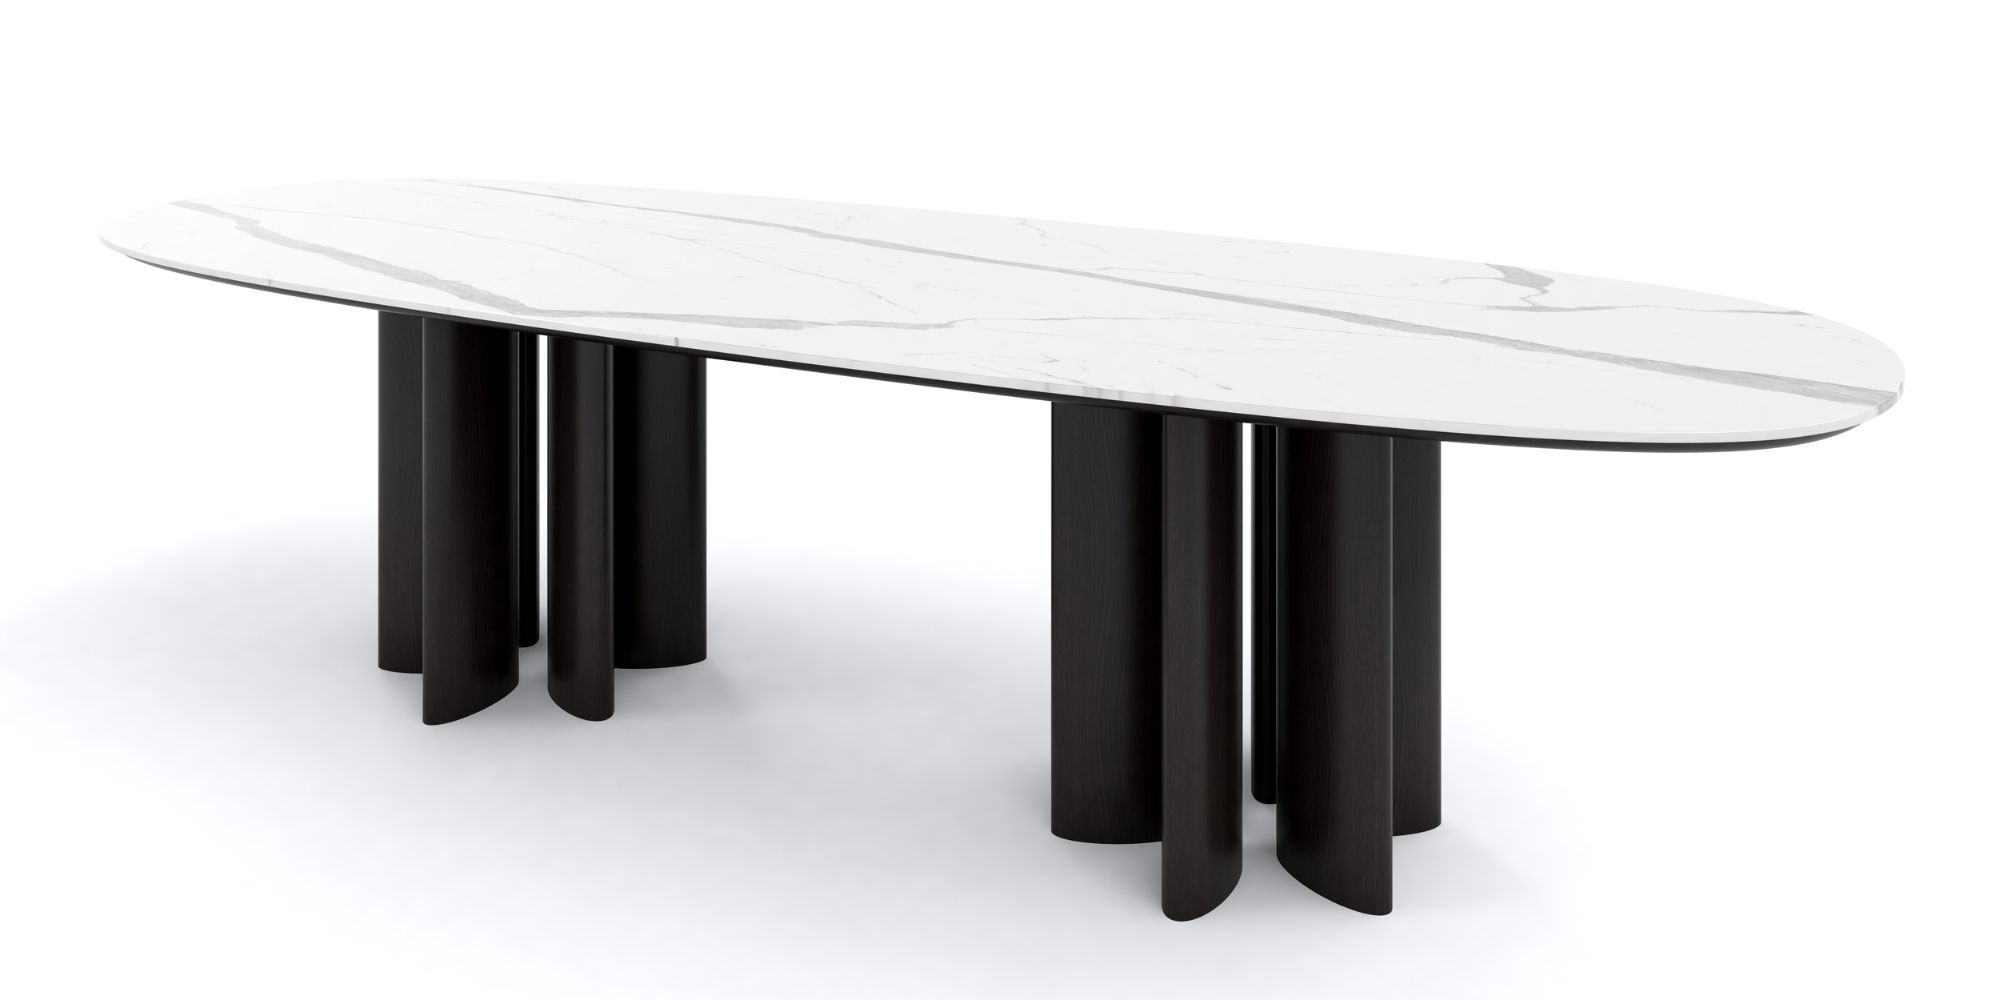 Melrose Coffee Table in Outdoor Tables Coffee Tables for Asteri collection